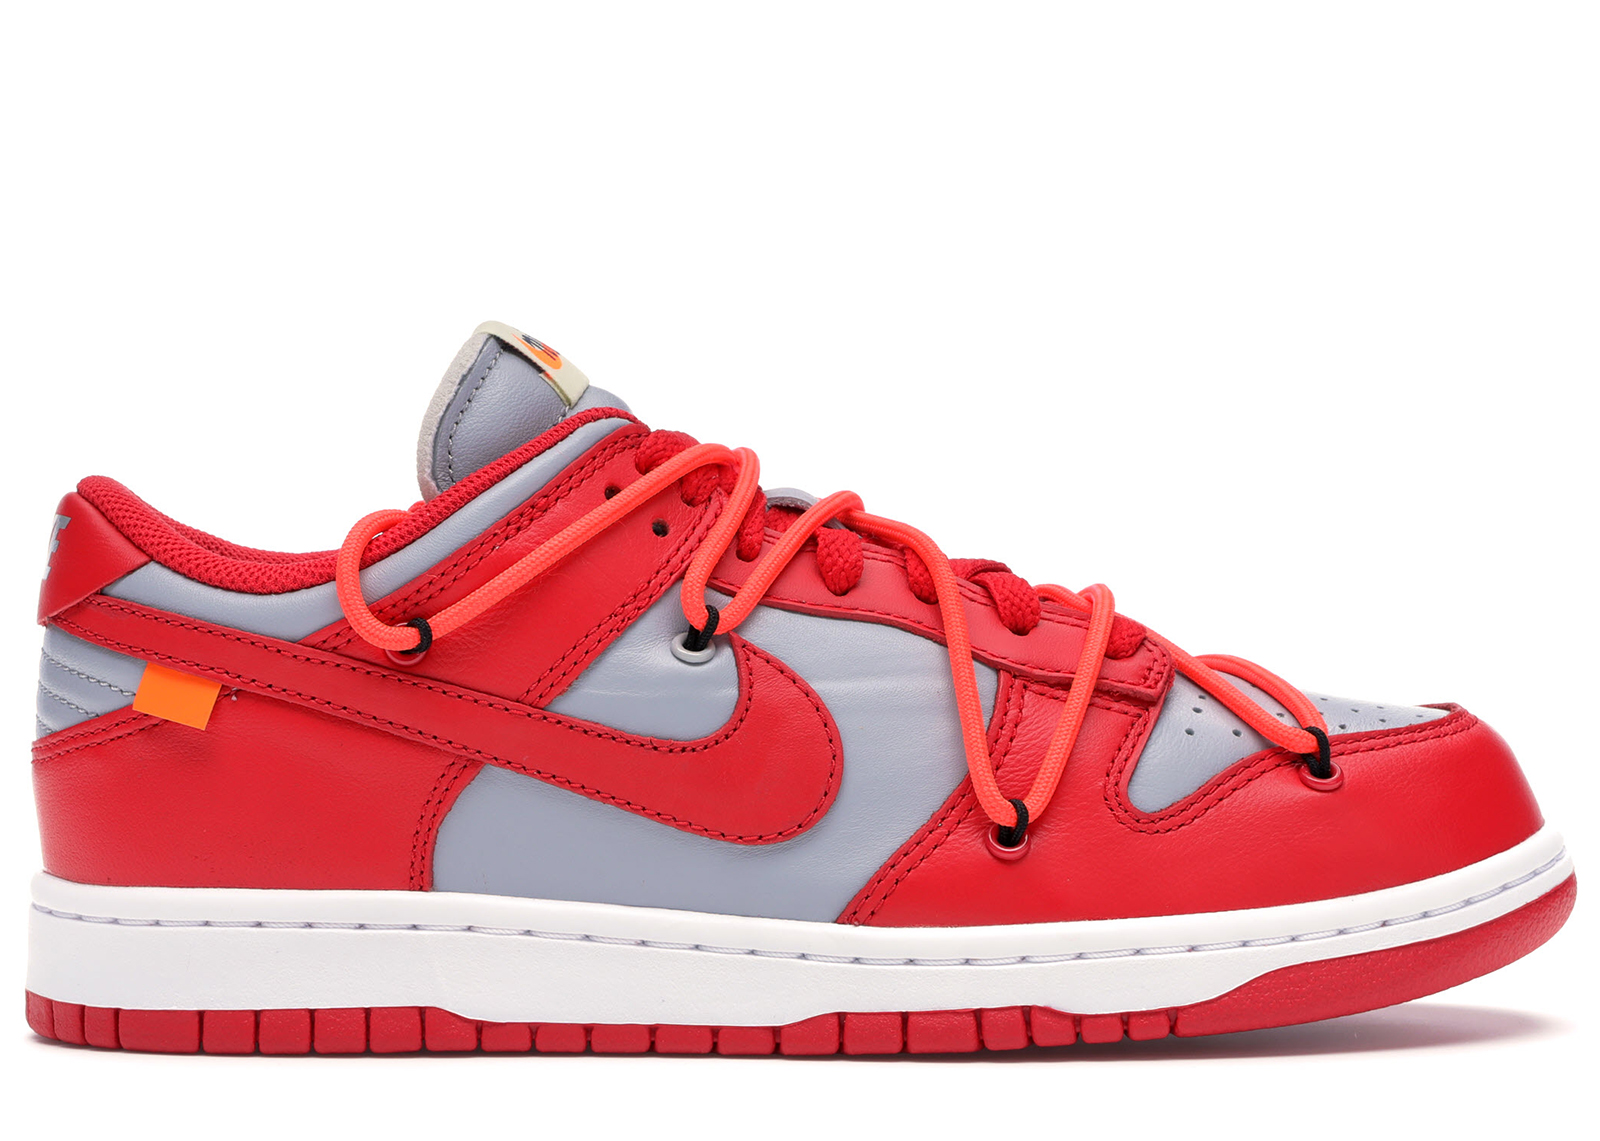 Nike Dunk Low Off-White University Red - CT0856-600 - US